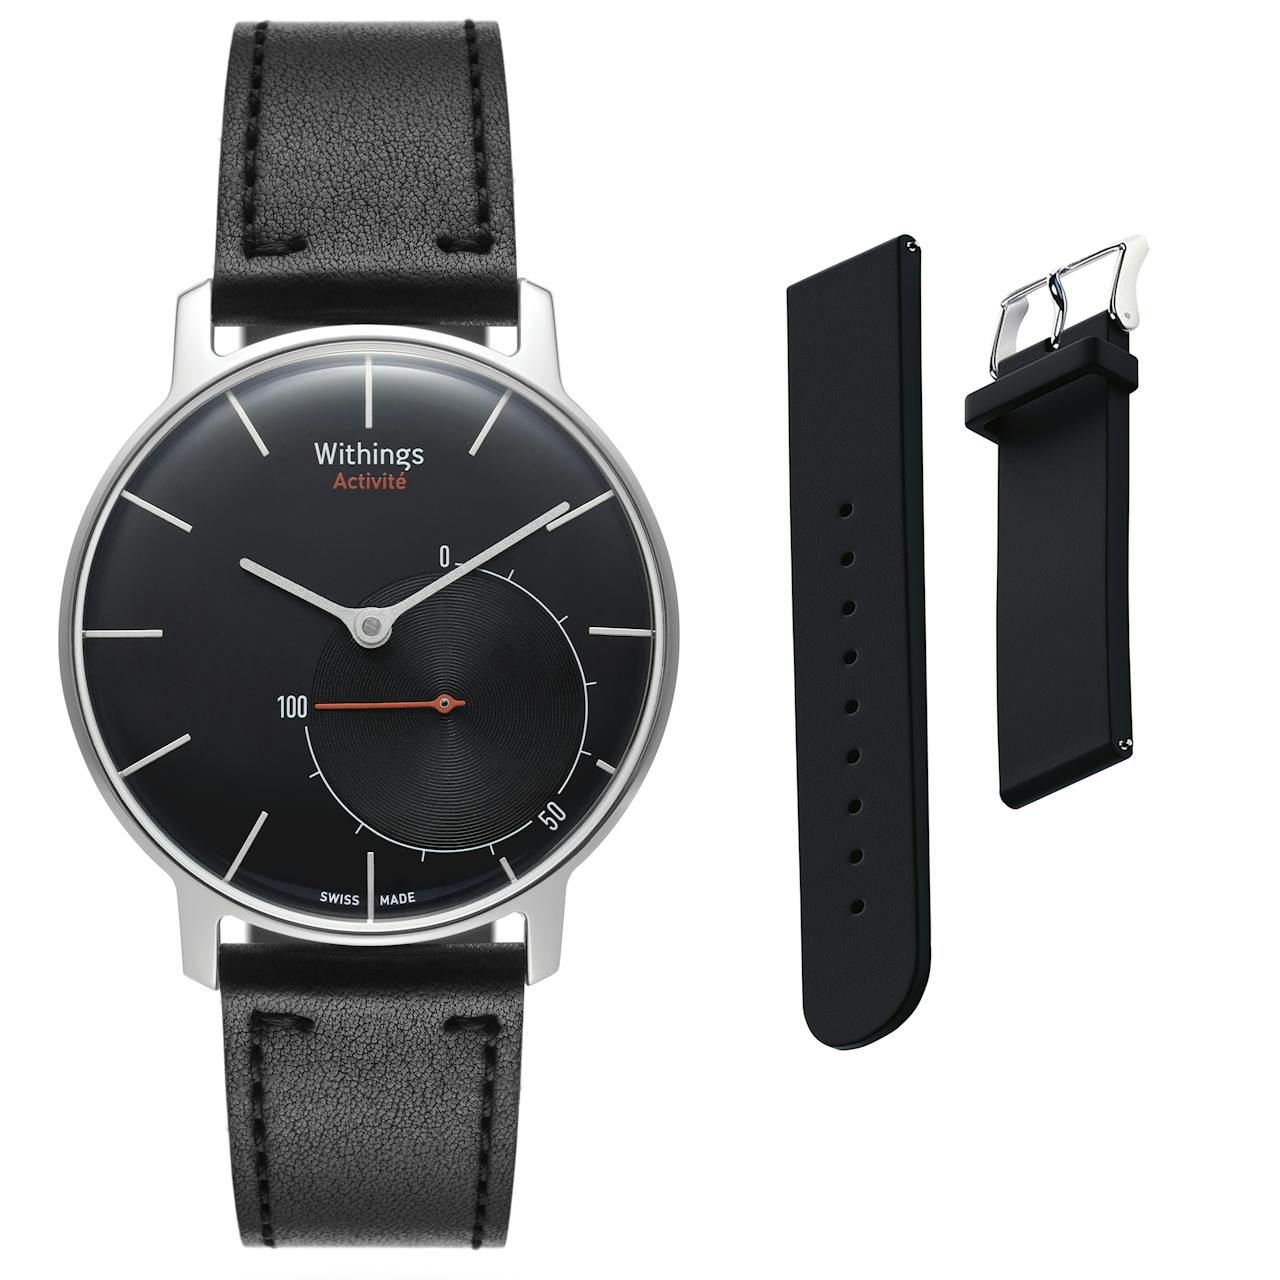 Withings Activité - Swiss Made